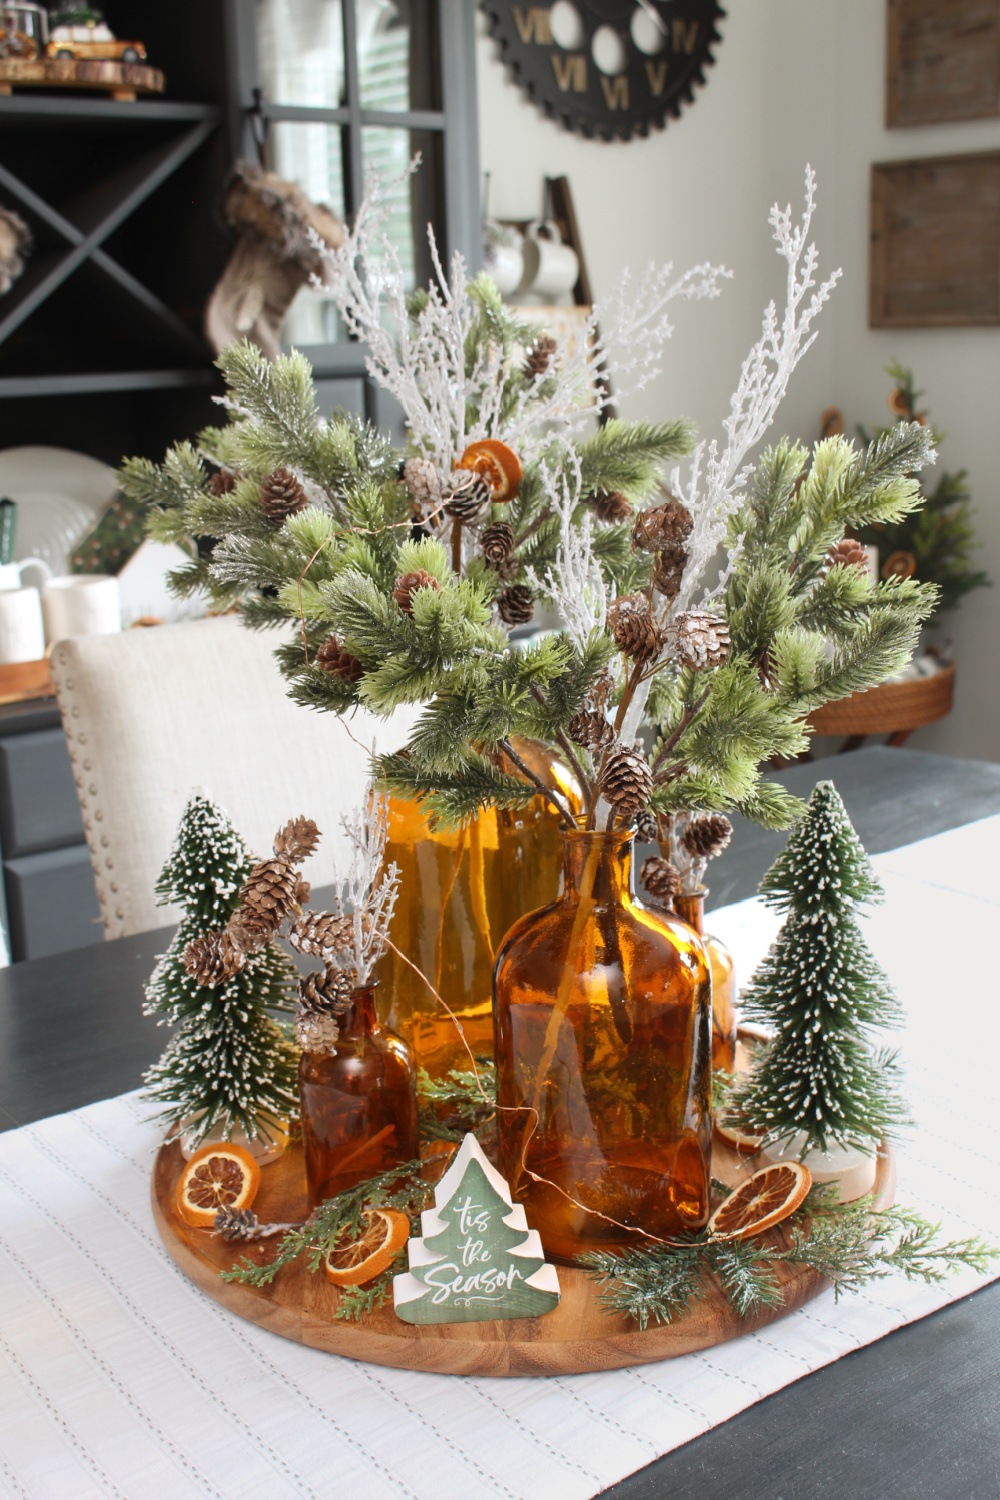 Beautiful Christmas centerpiece with amber glass bottles, greenery, and dried oranges.